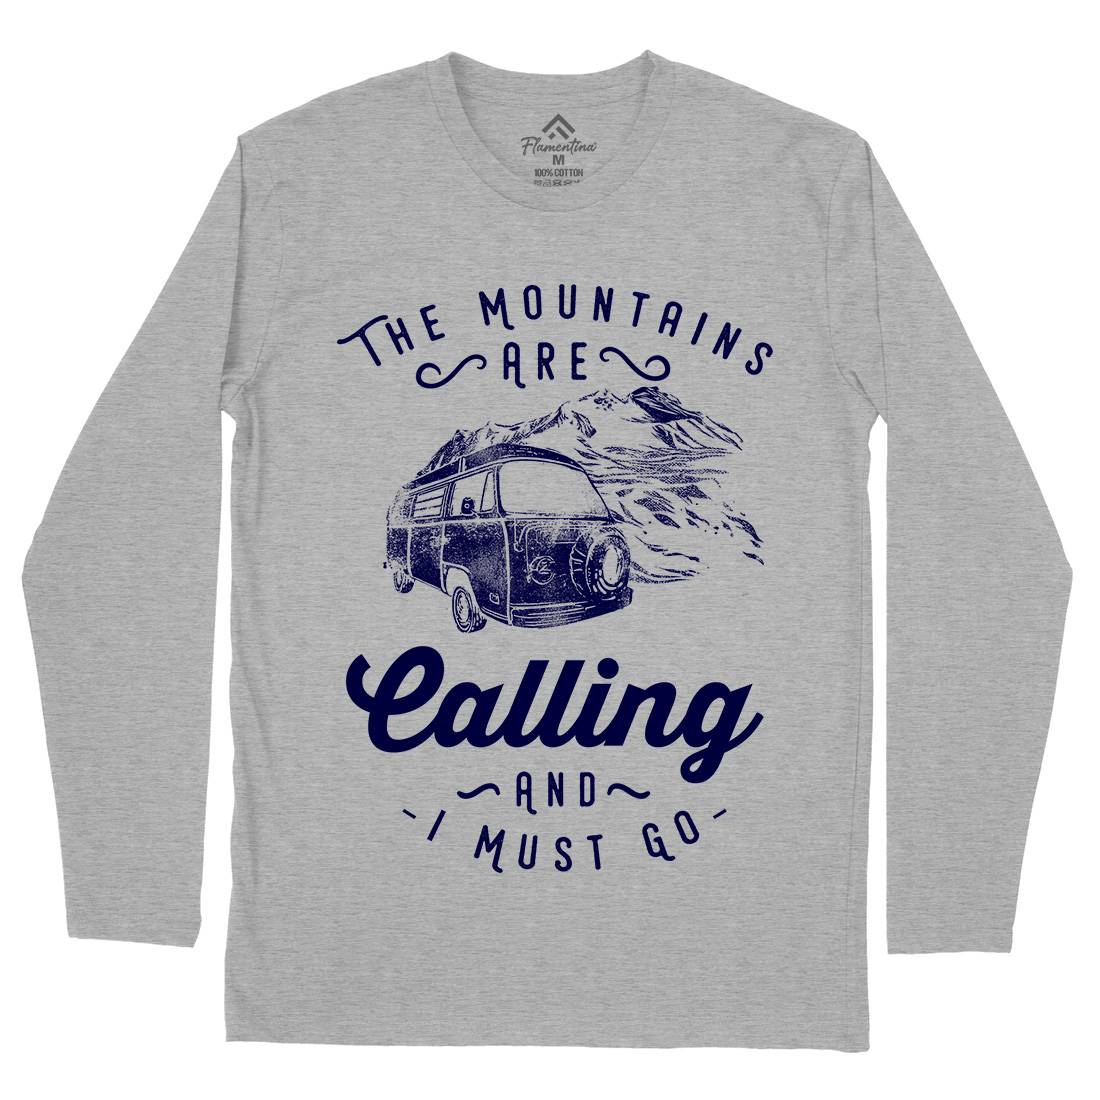 The Mountains Are Calling Mens Long Sleeve T-Shirt Nature C988